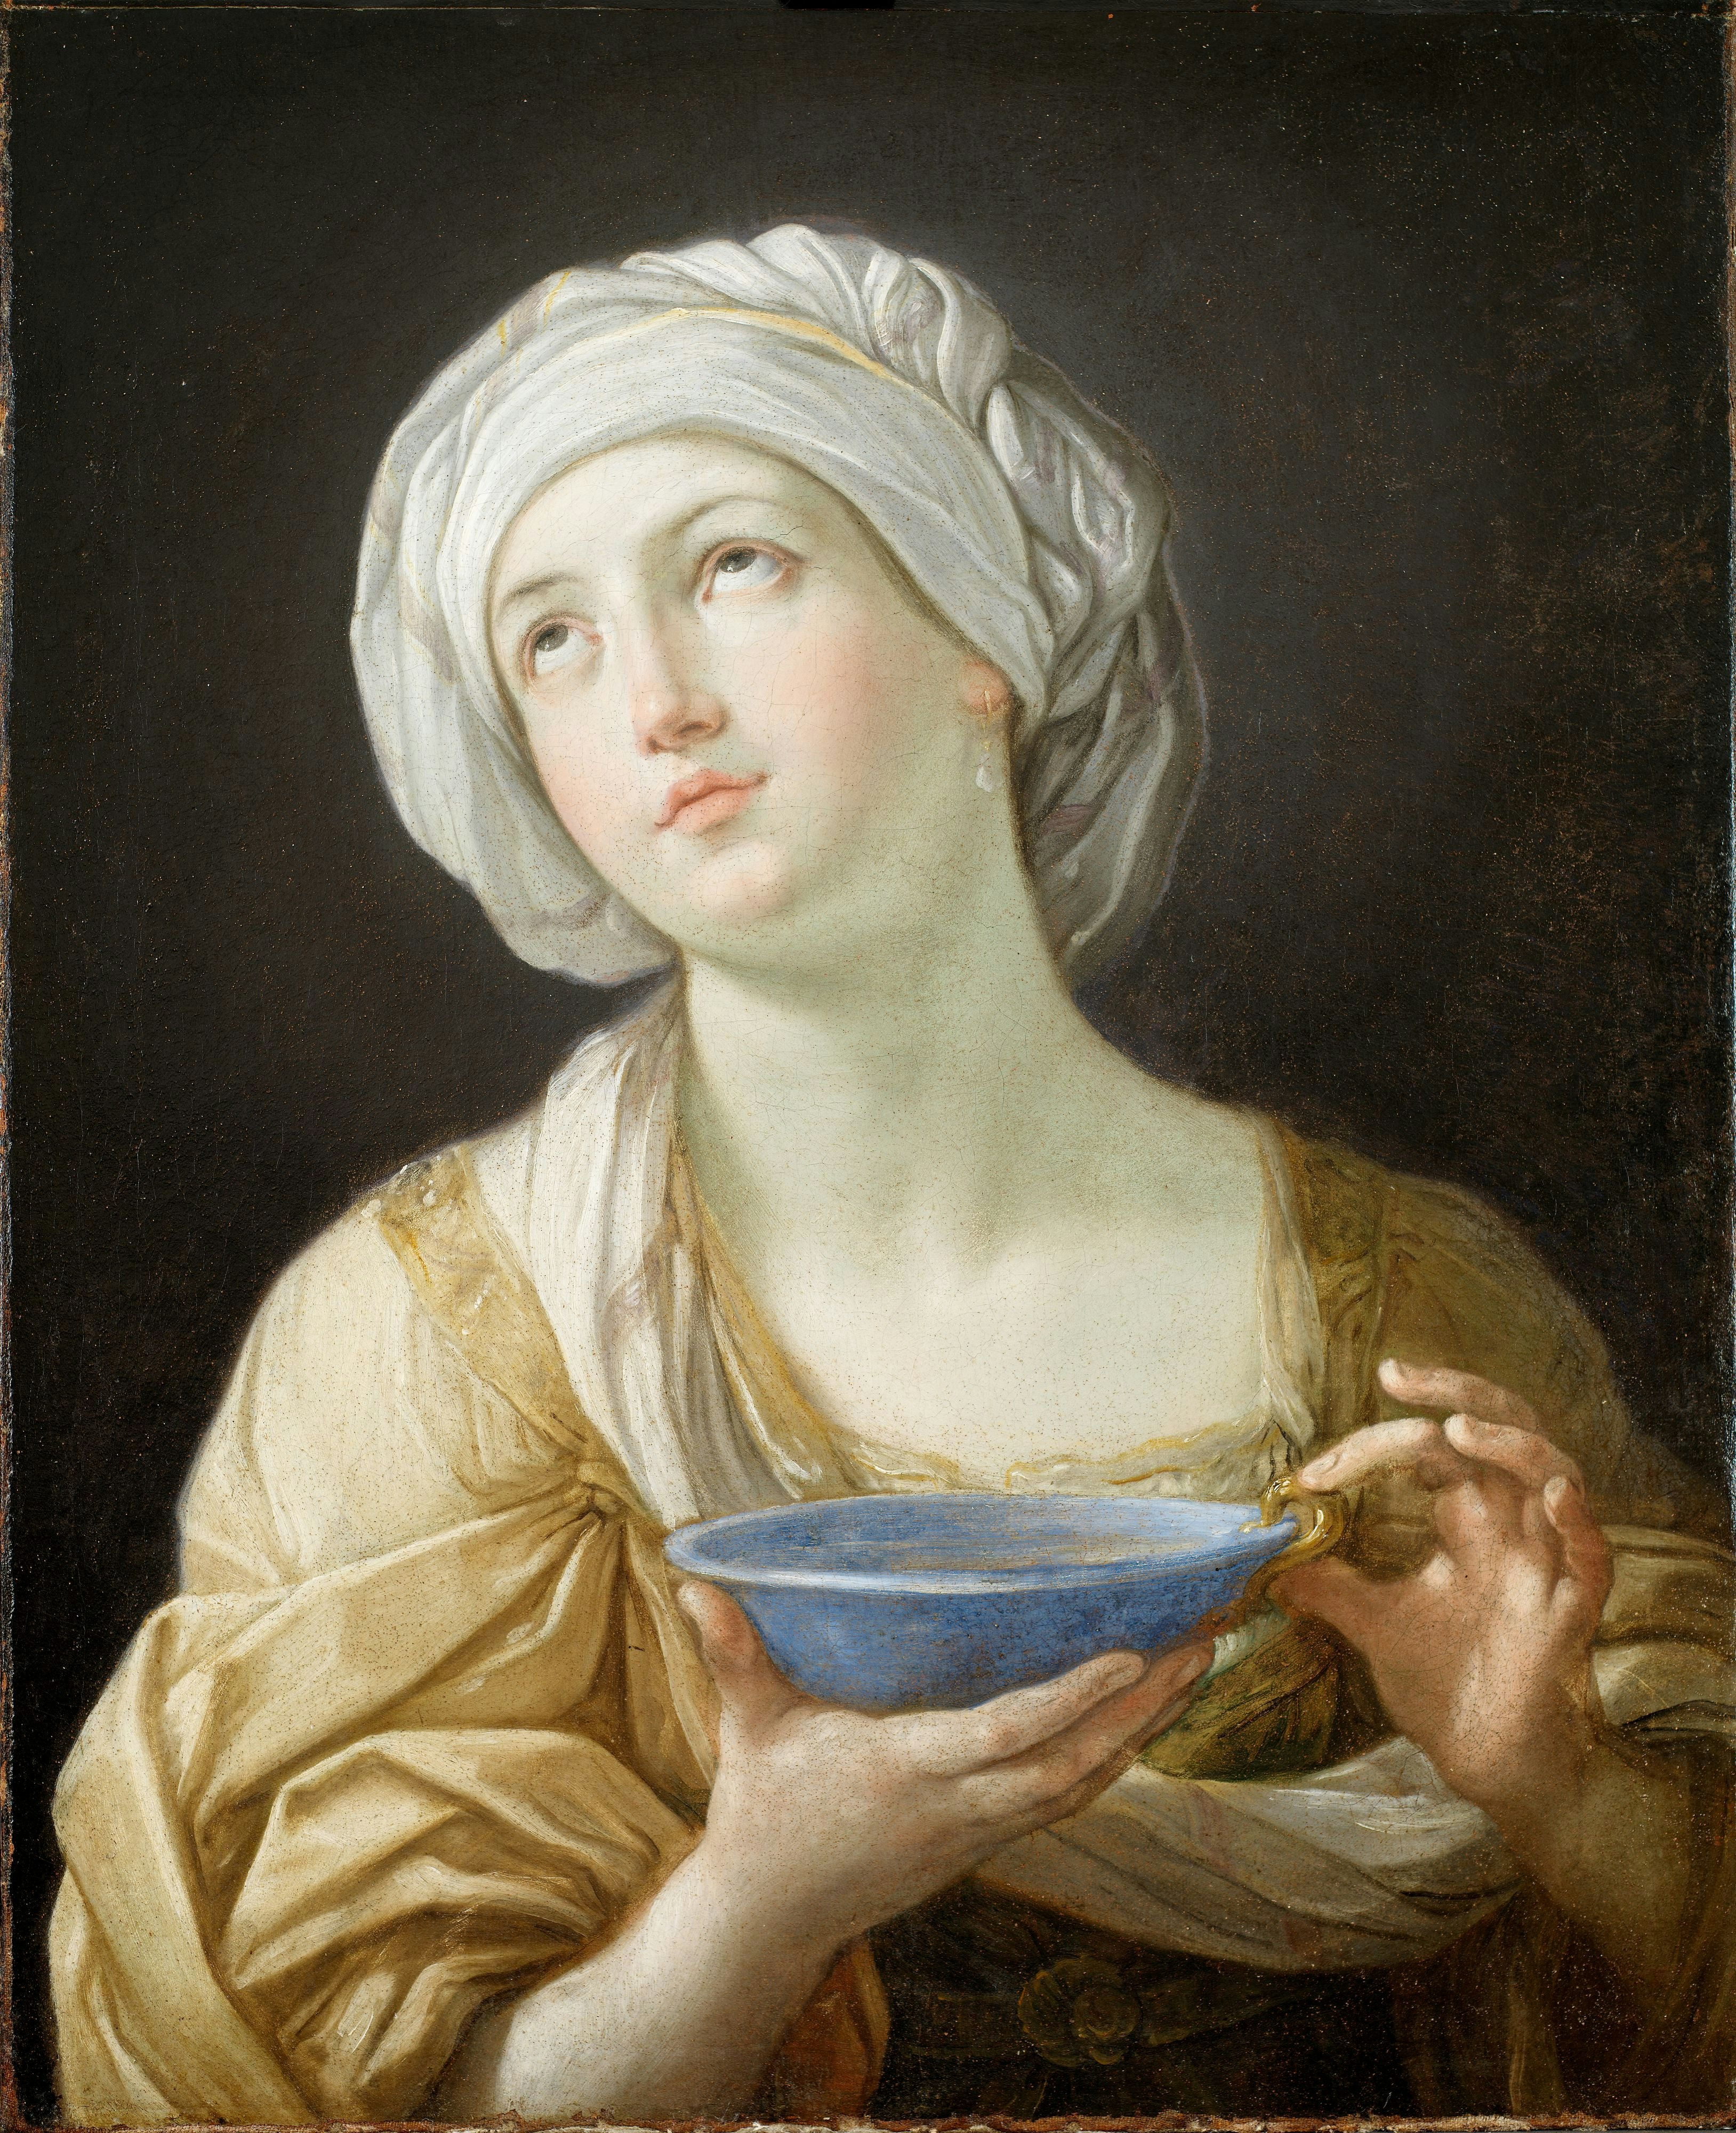 Portrait of a Woman, 1638-39 by Guido Reni. The subject may represent Artemisia II of Caria (d.350 BC) wife of Mausolus, the governor of Caria in Asia Minor. After the death of her husband, she mixed his ashes in liquid which she drank, making herself a living tomb. The story was used as a symbol of a widow's devotion to her husband's memory.